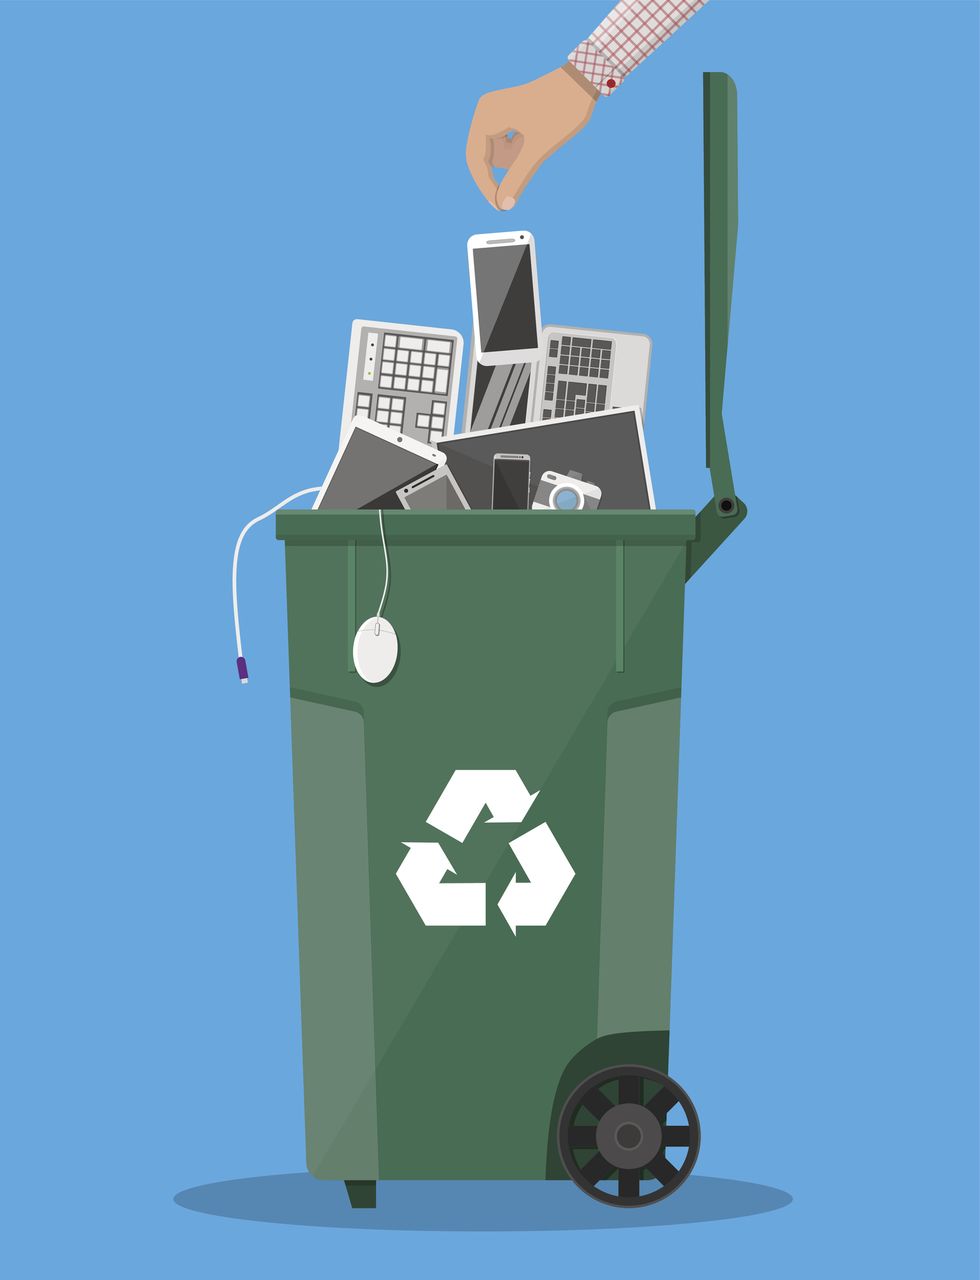 e waste recycle bin container with old computer equipment, phones, laptop, mouse, keyboard vector illustration in flat style